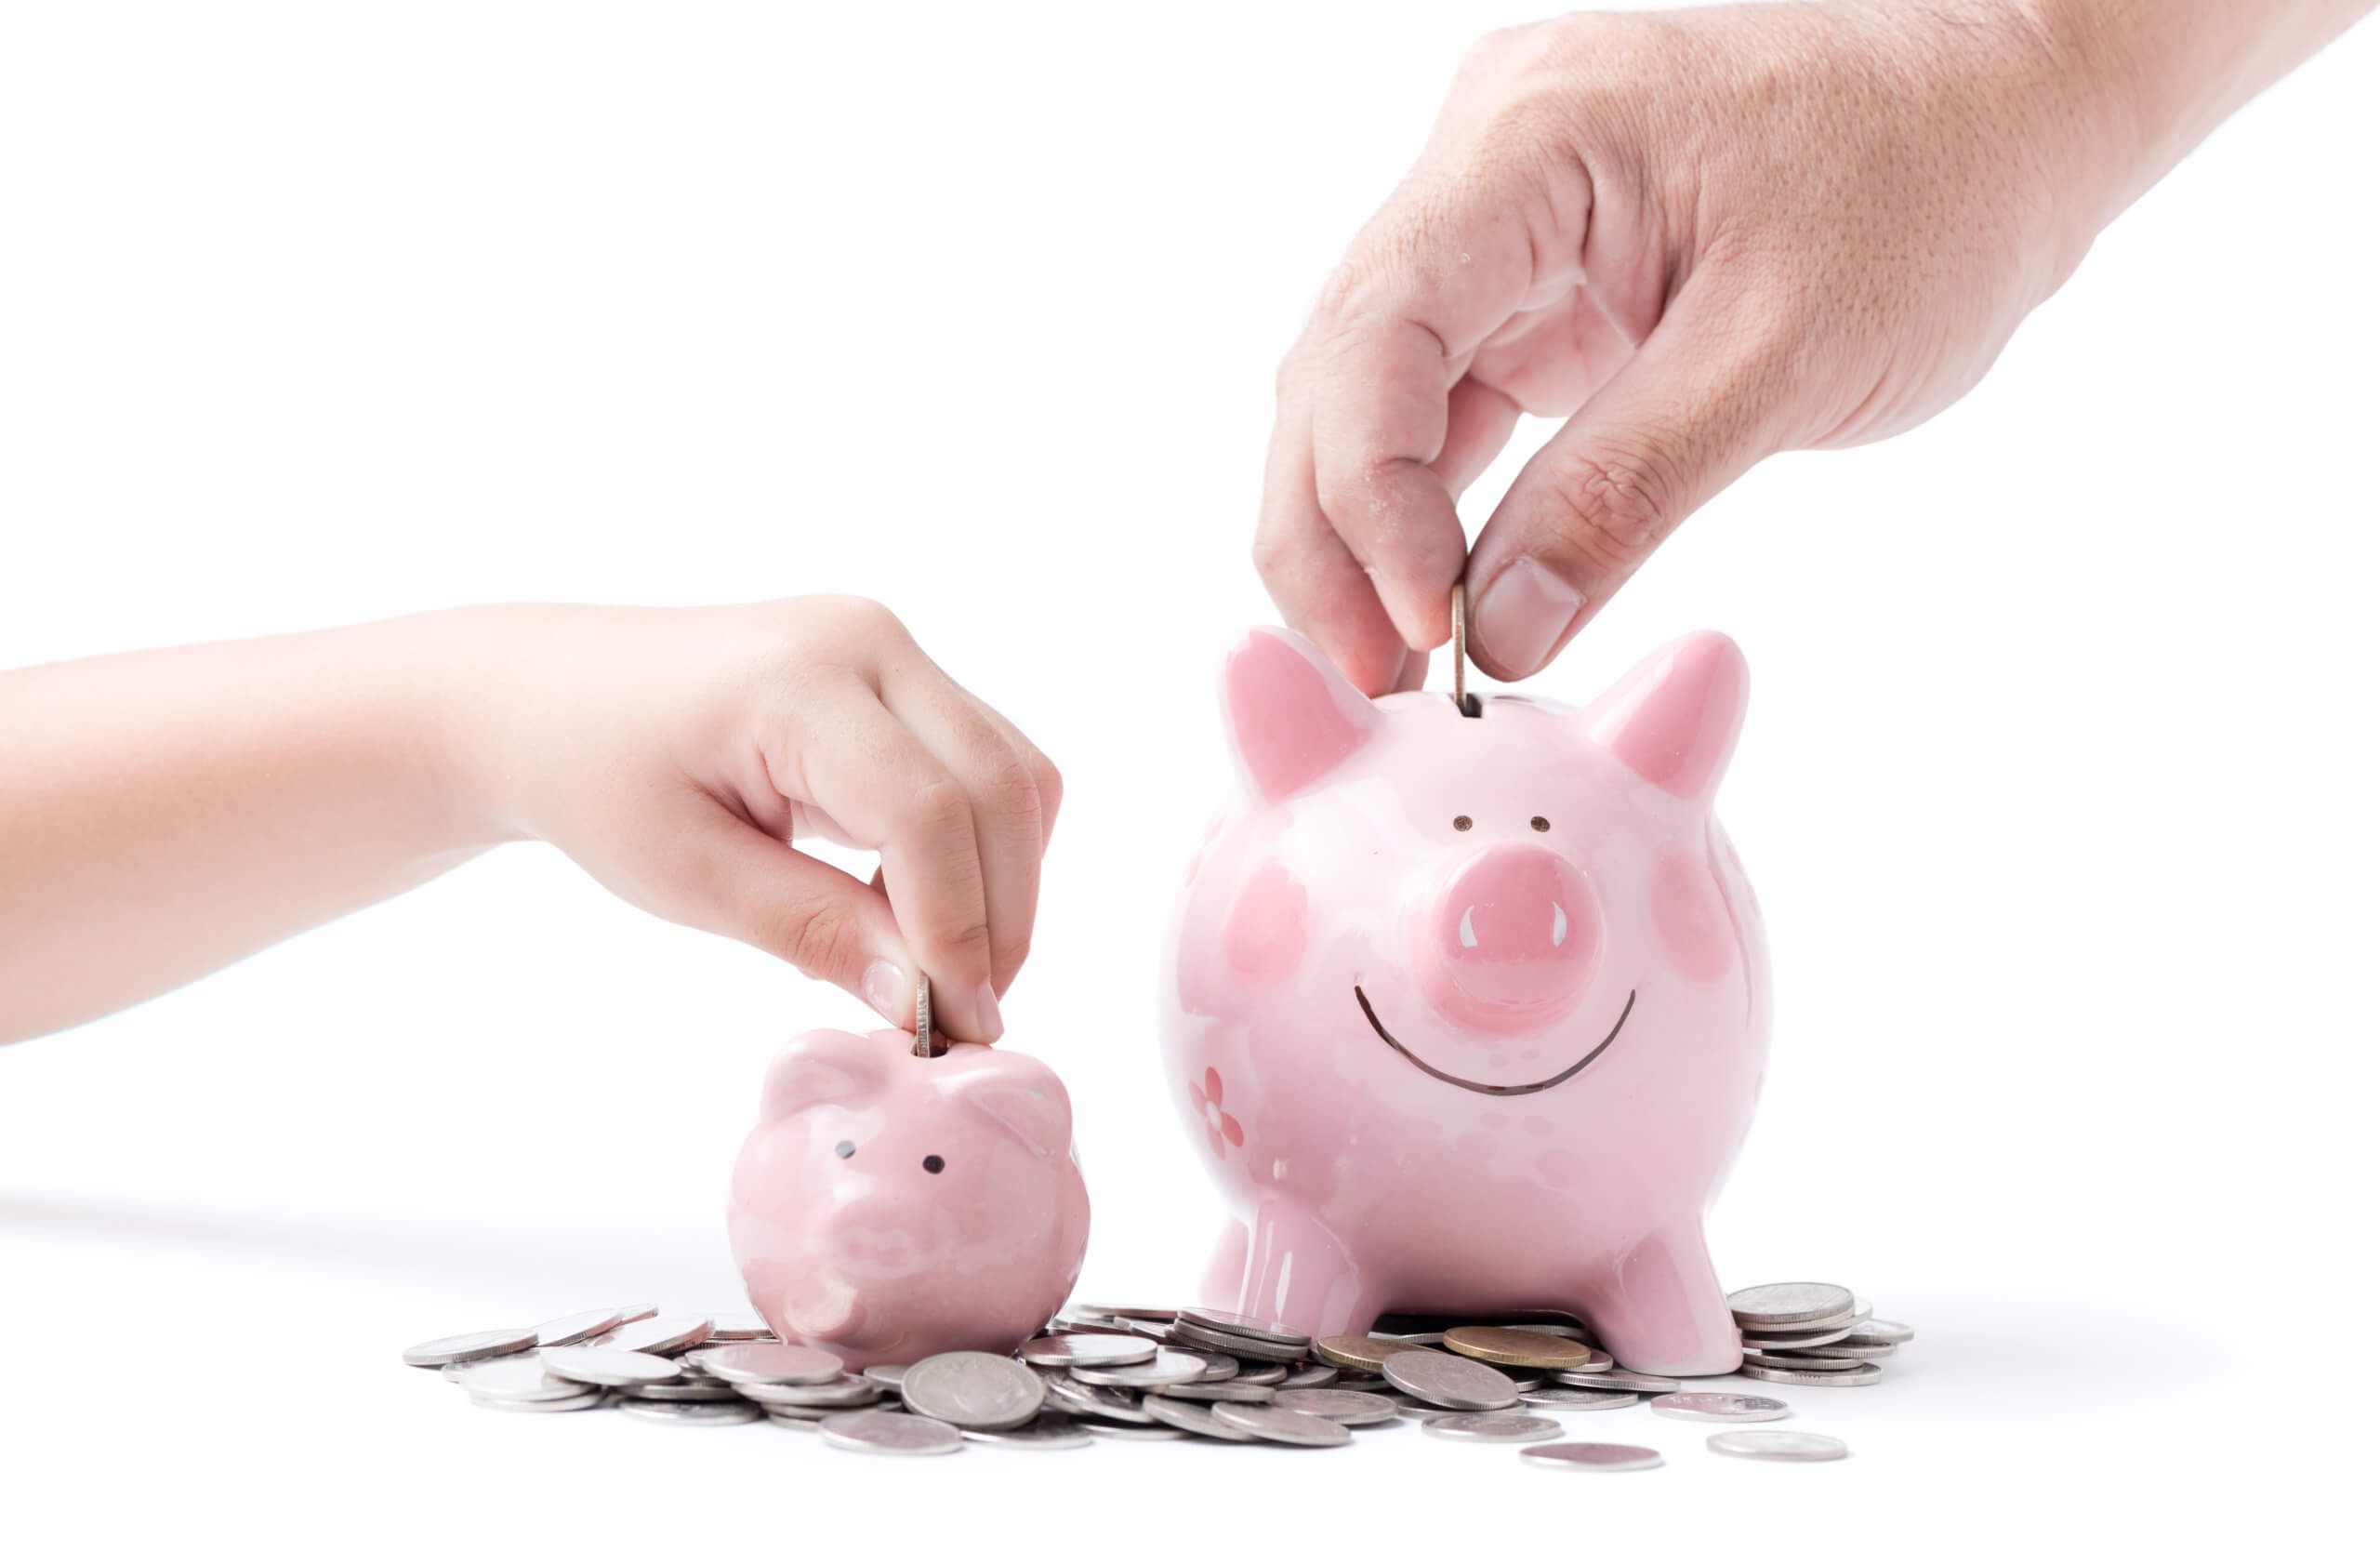 HOW TO RAISE FINANCIALLY RESPONSIBLE CHILDREN